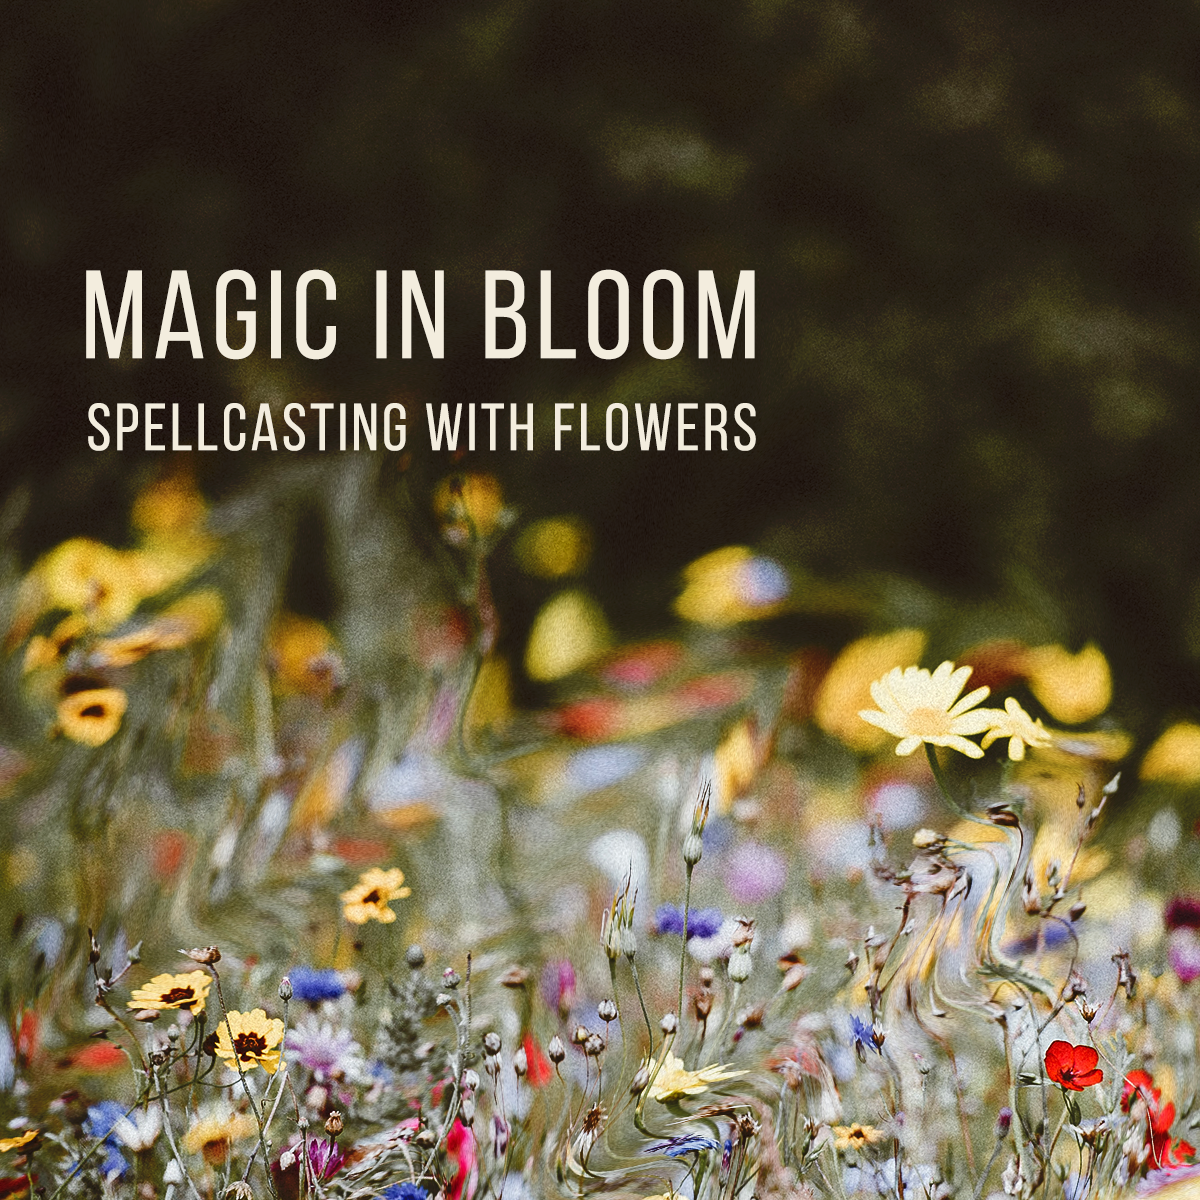 MAGIC IN BLOOM: Spellcrafting with Flowers